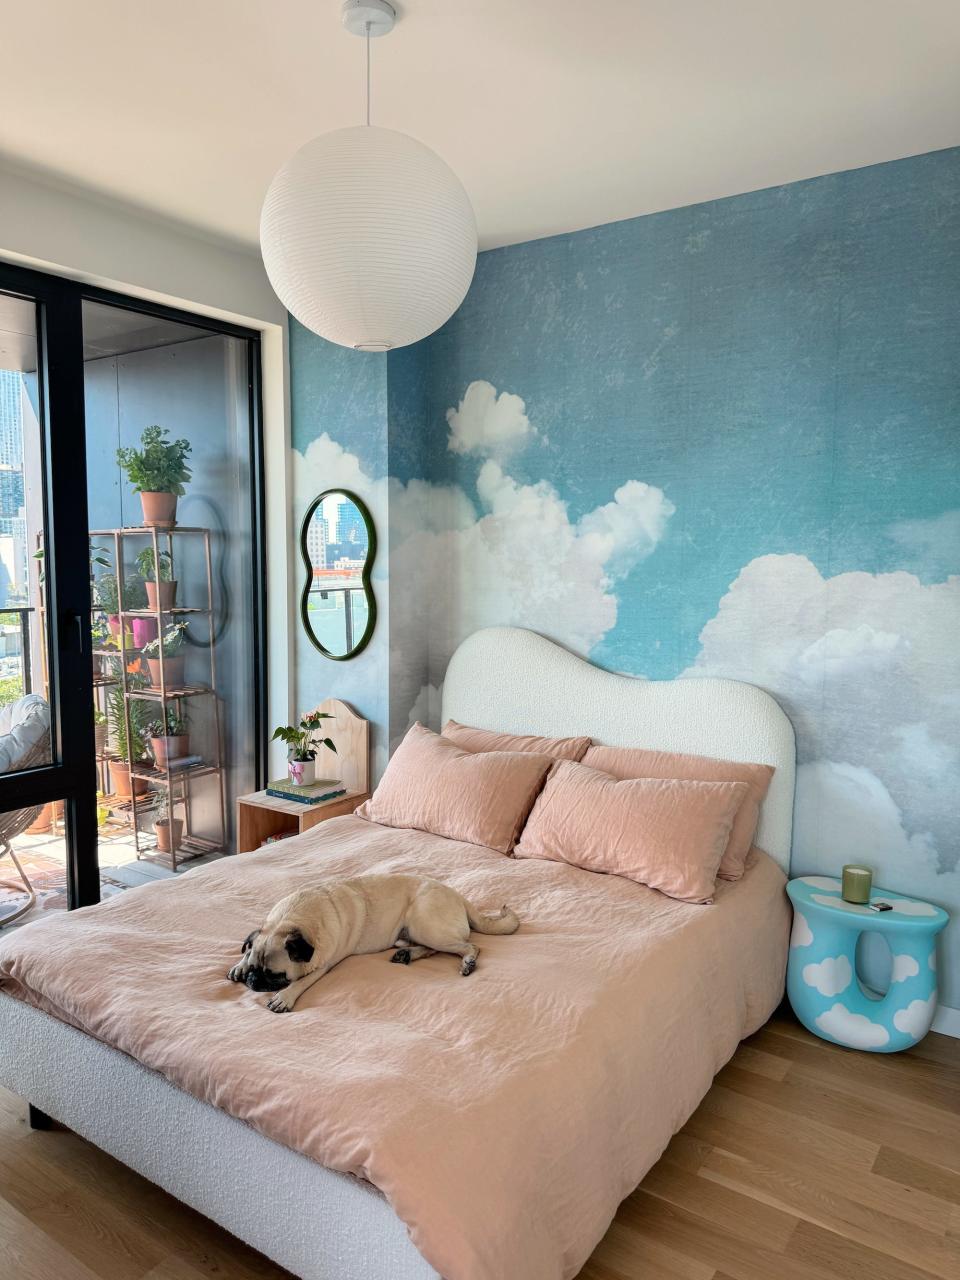 A bedroom with a wall covered in wallpaper that looks like a sky.